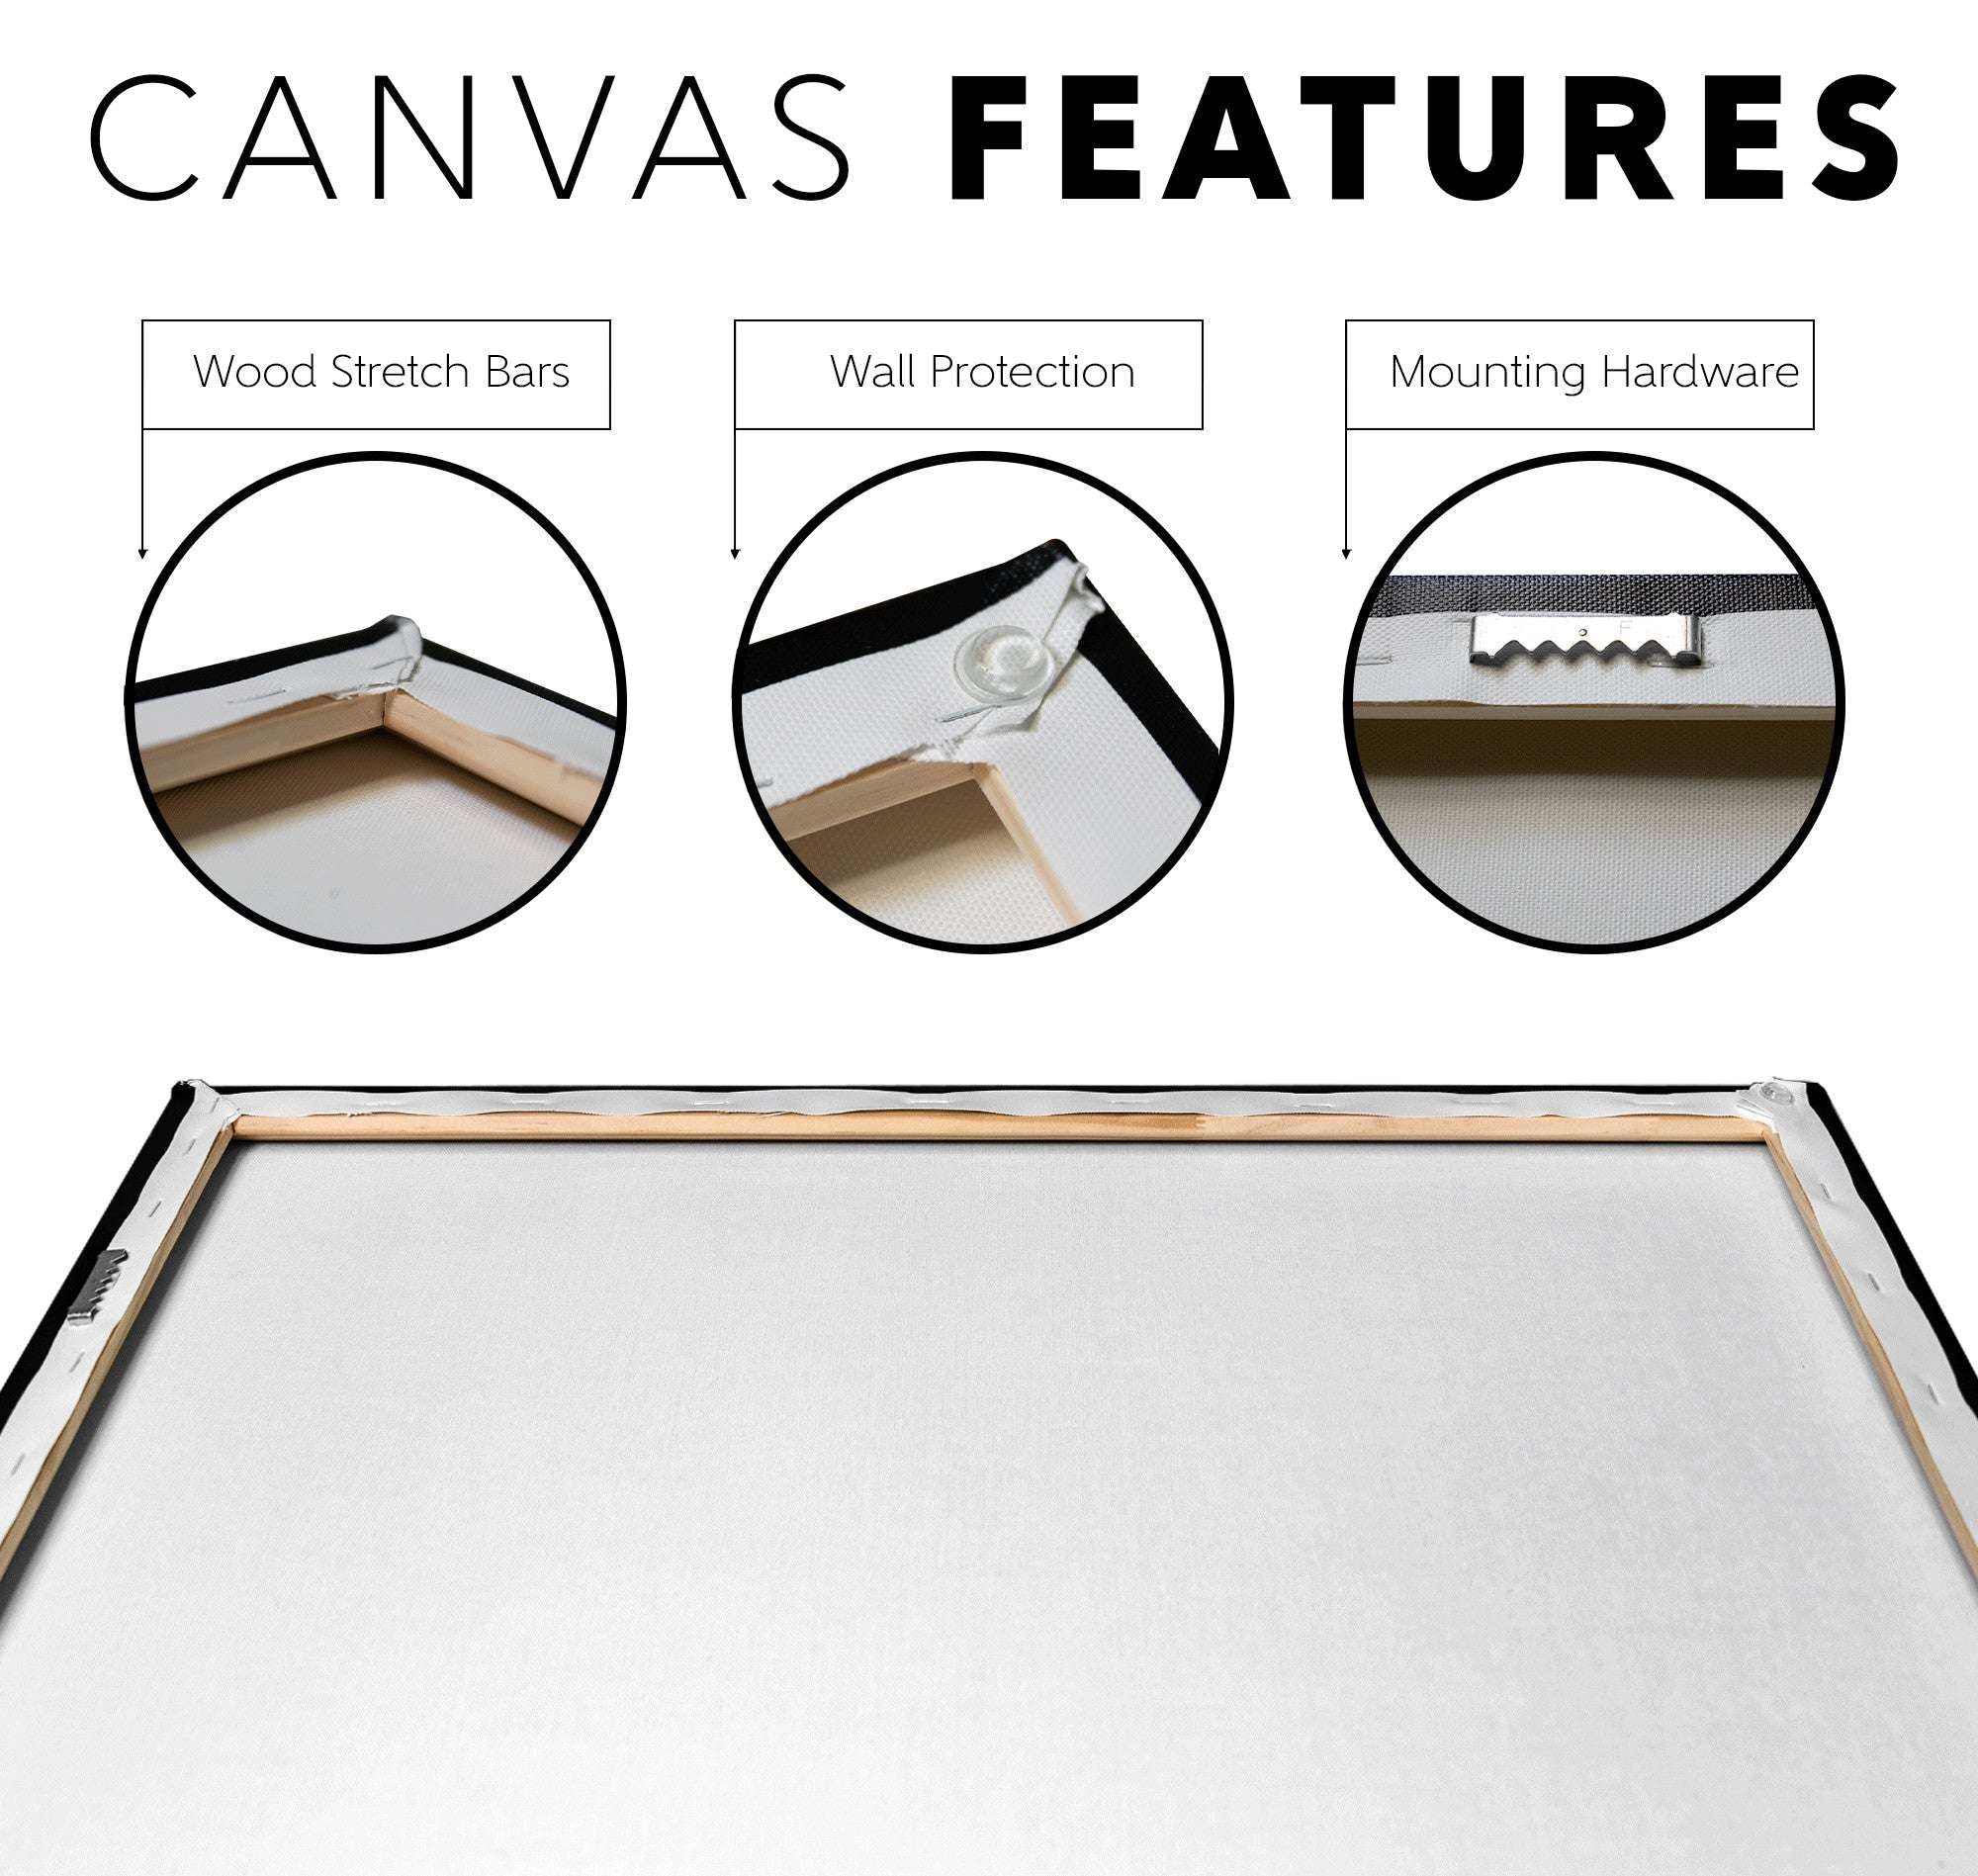 Illustration detailing features of a Canvas Art Print, including wood stretch bars, wall protection, and mounting hardware, with labeled close-up views and a full canvas frame at the bottom.